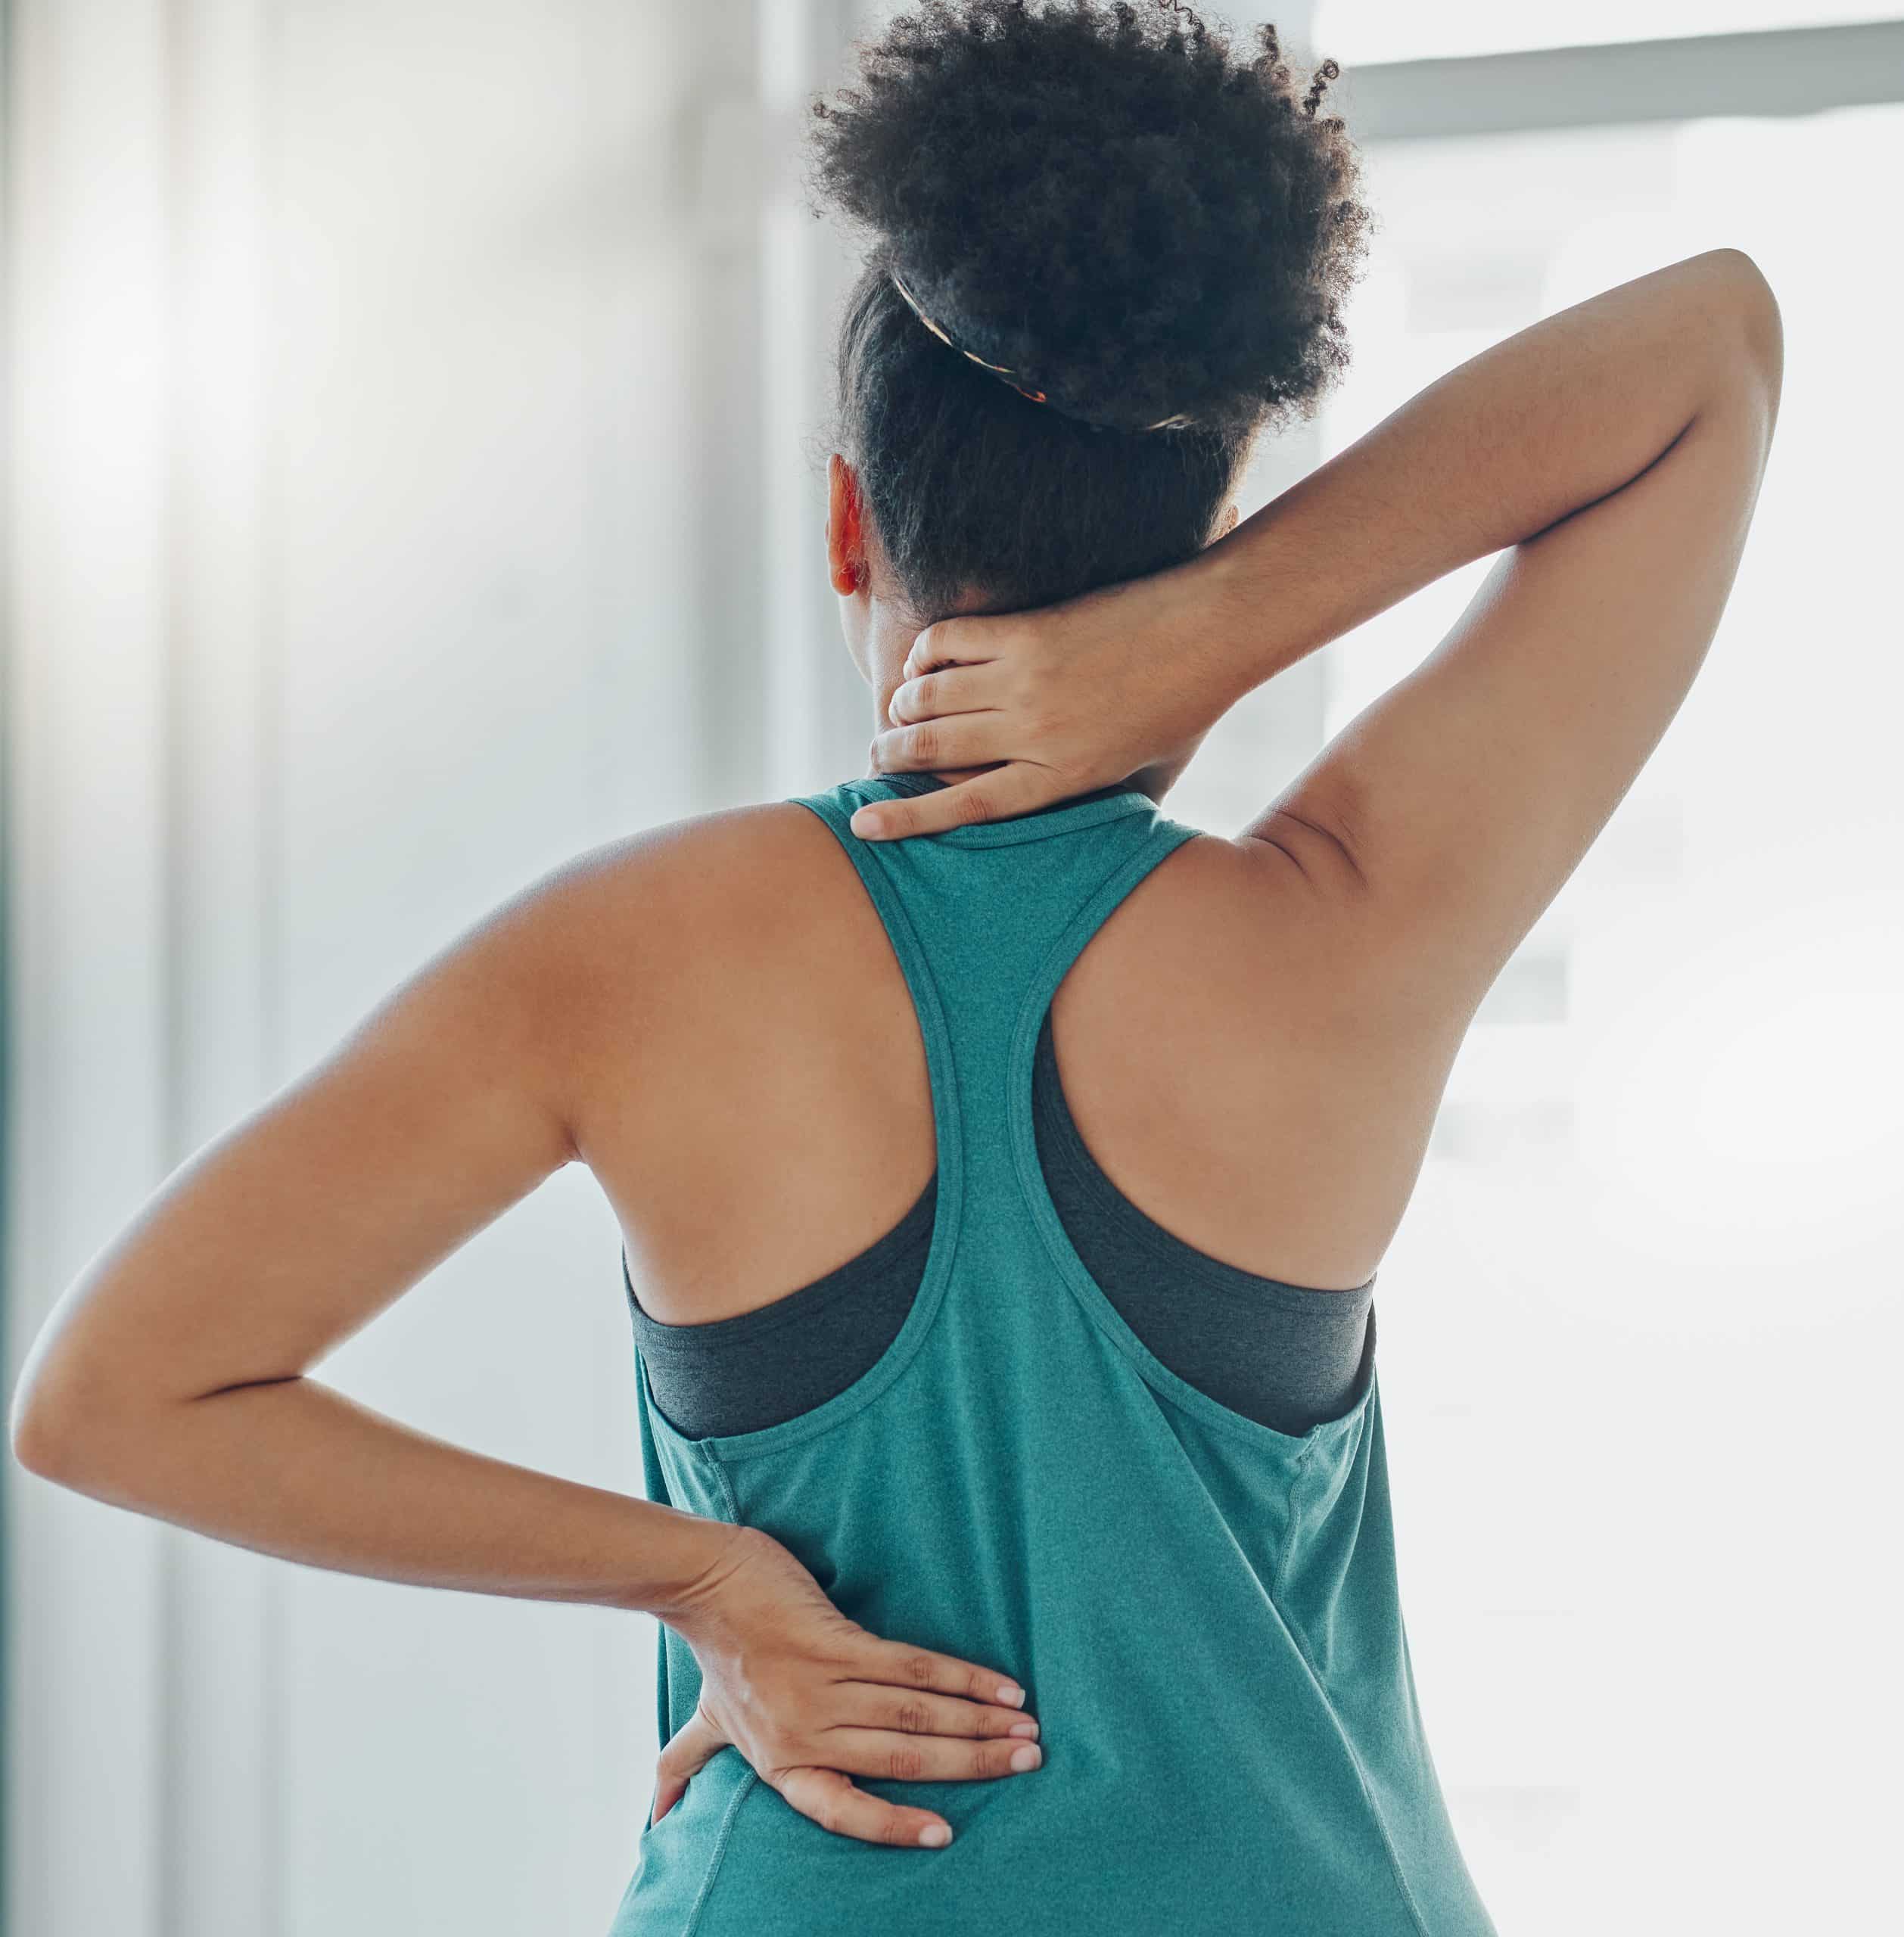 black-woman-neck-and-back-pain-at-exercise-train-2023-02-24-20-19-47-utc